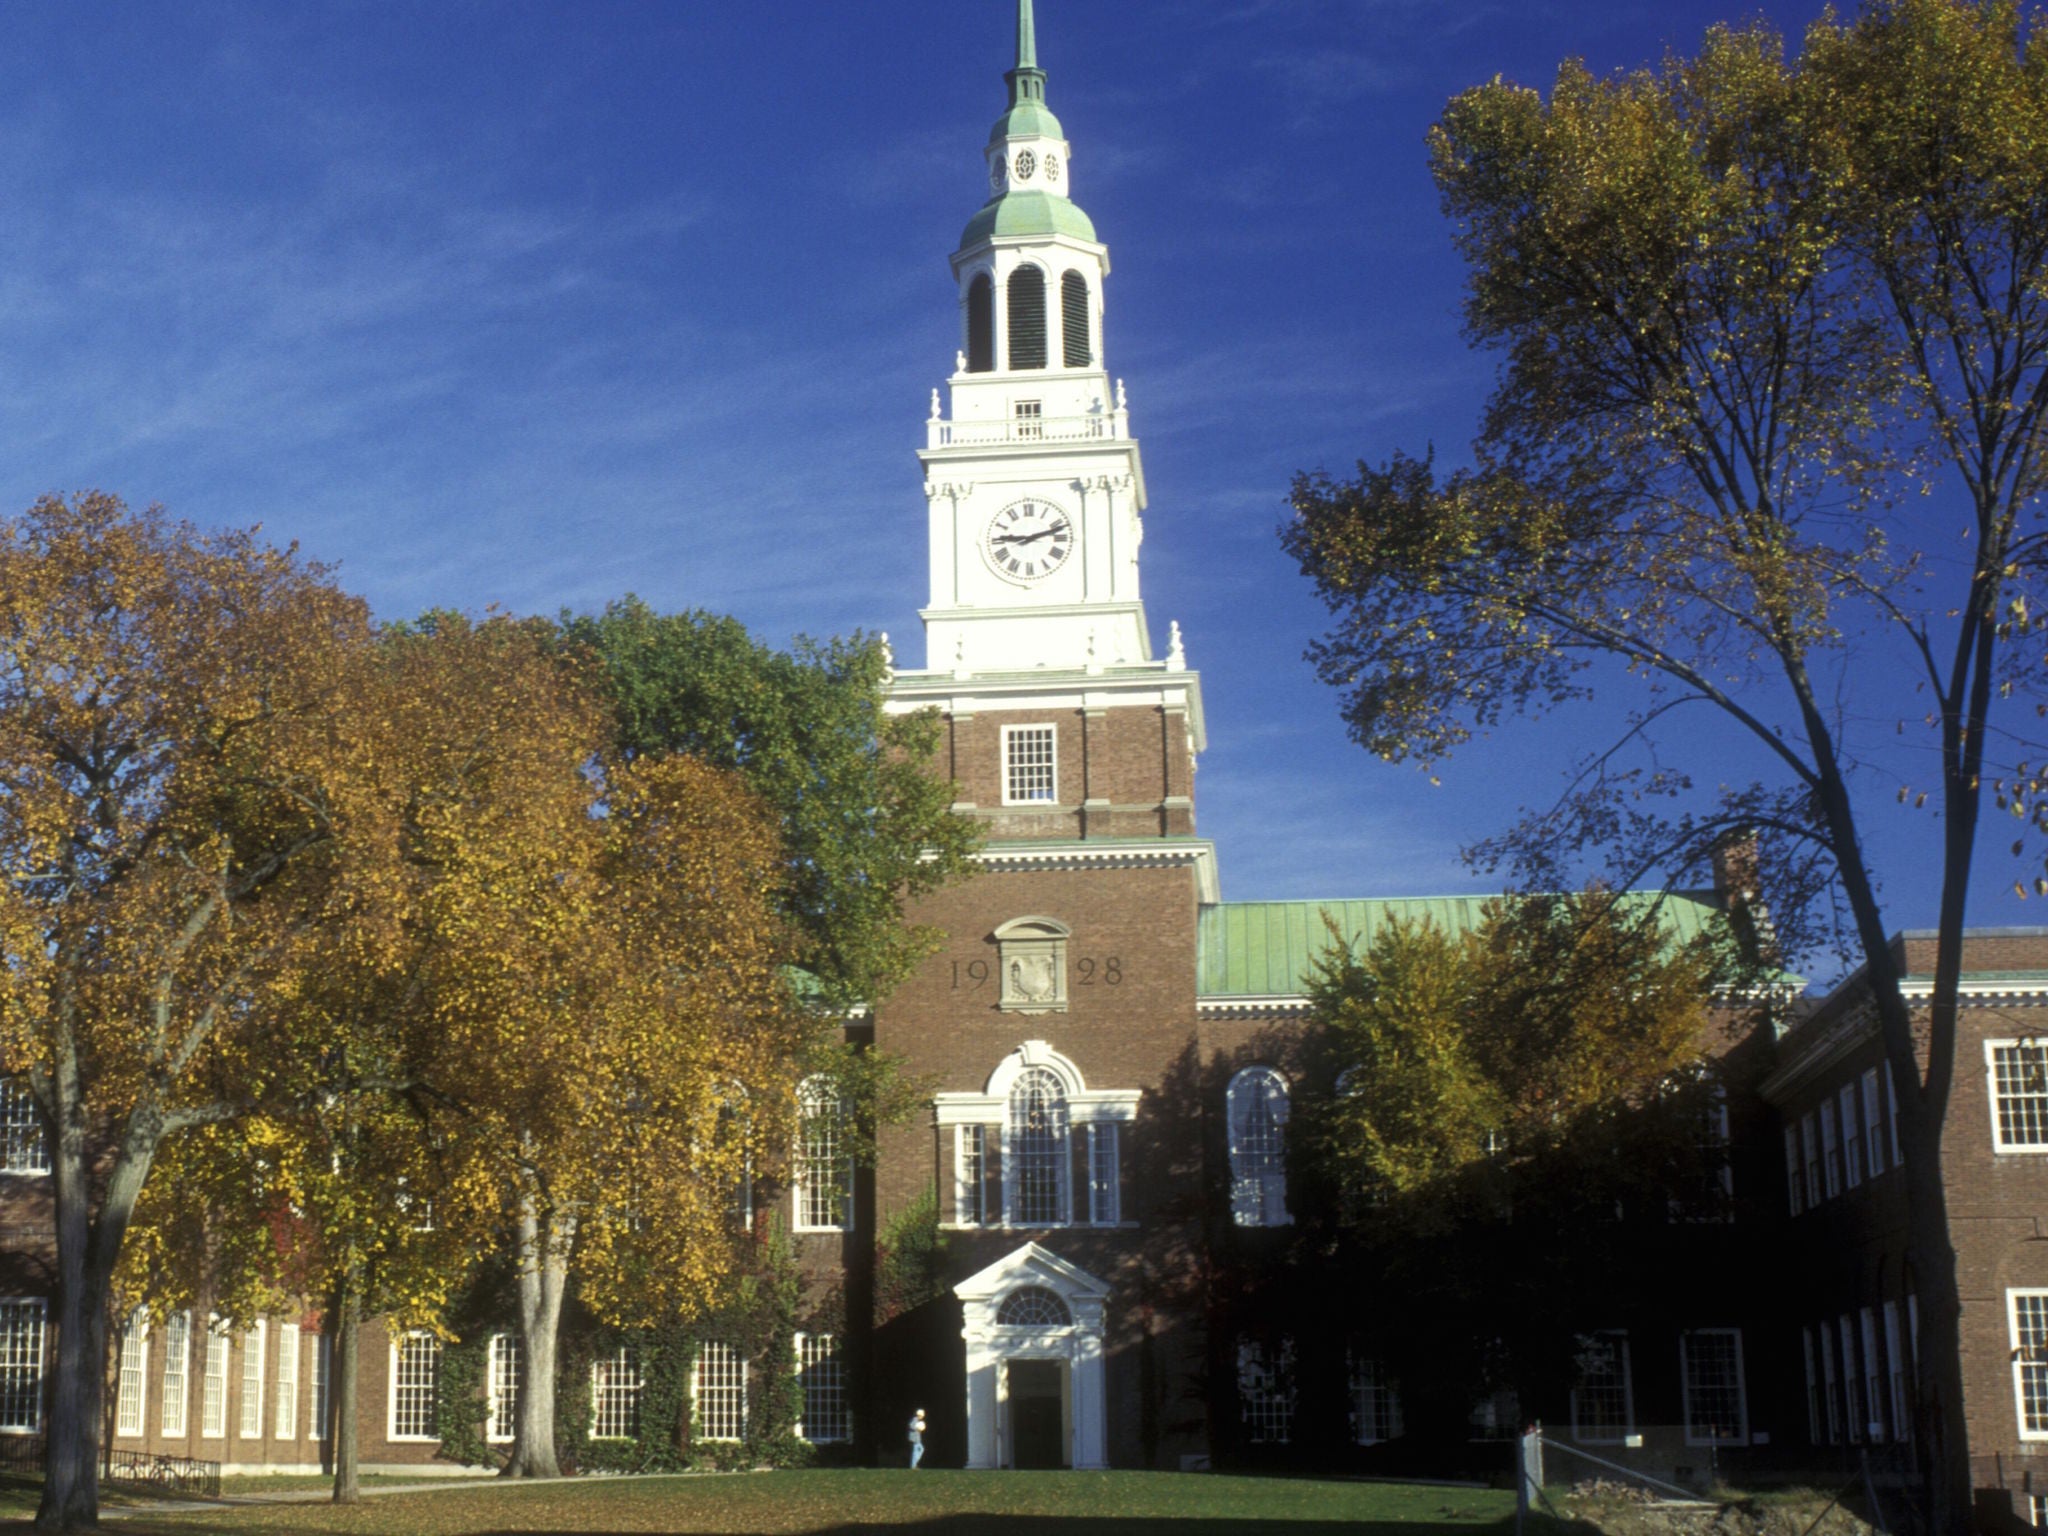 Dartmouth College was established in 1769